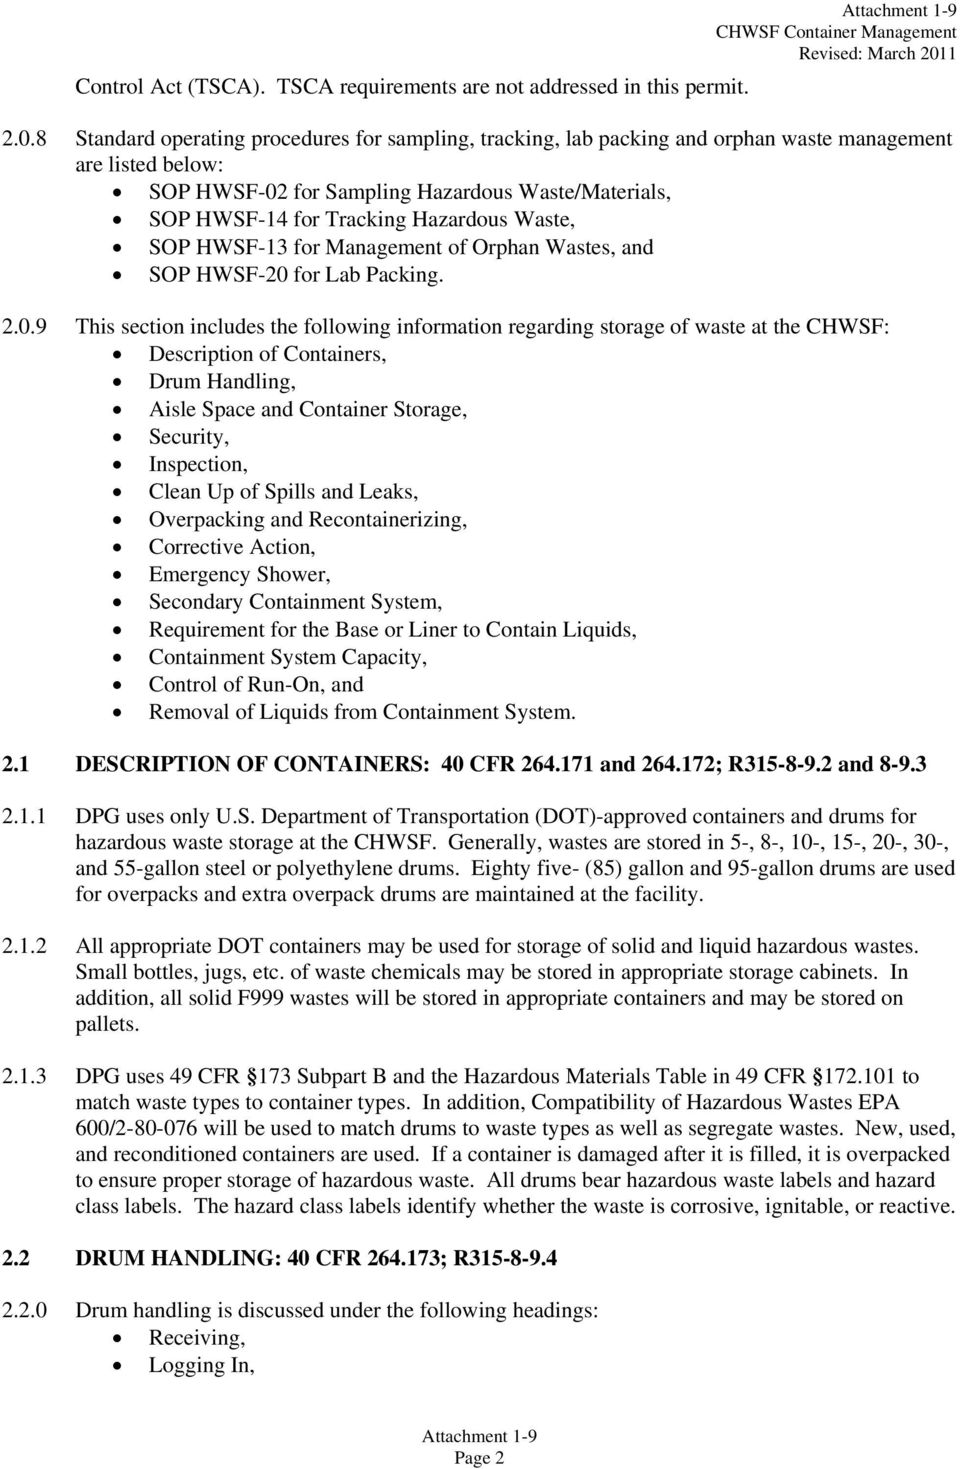 Hazardous Waste, SOP HWSF-13 for Management of Orphan Wastes, and SOP HWSF-20 